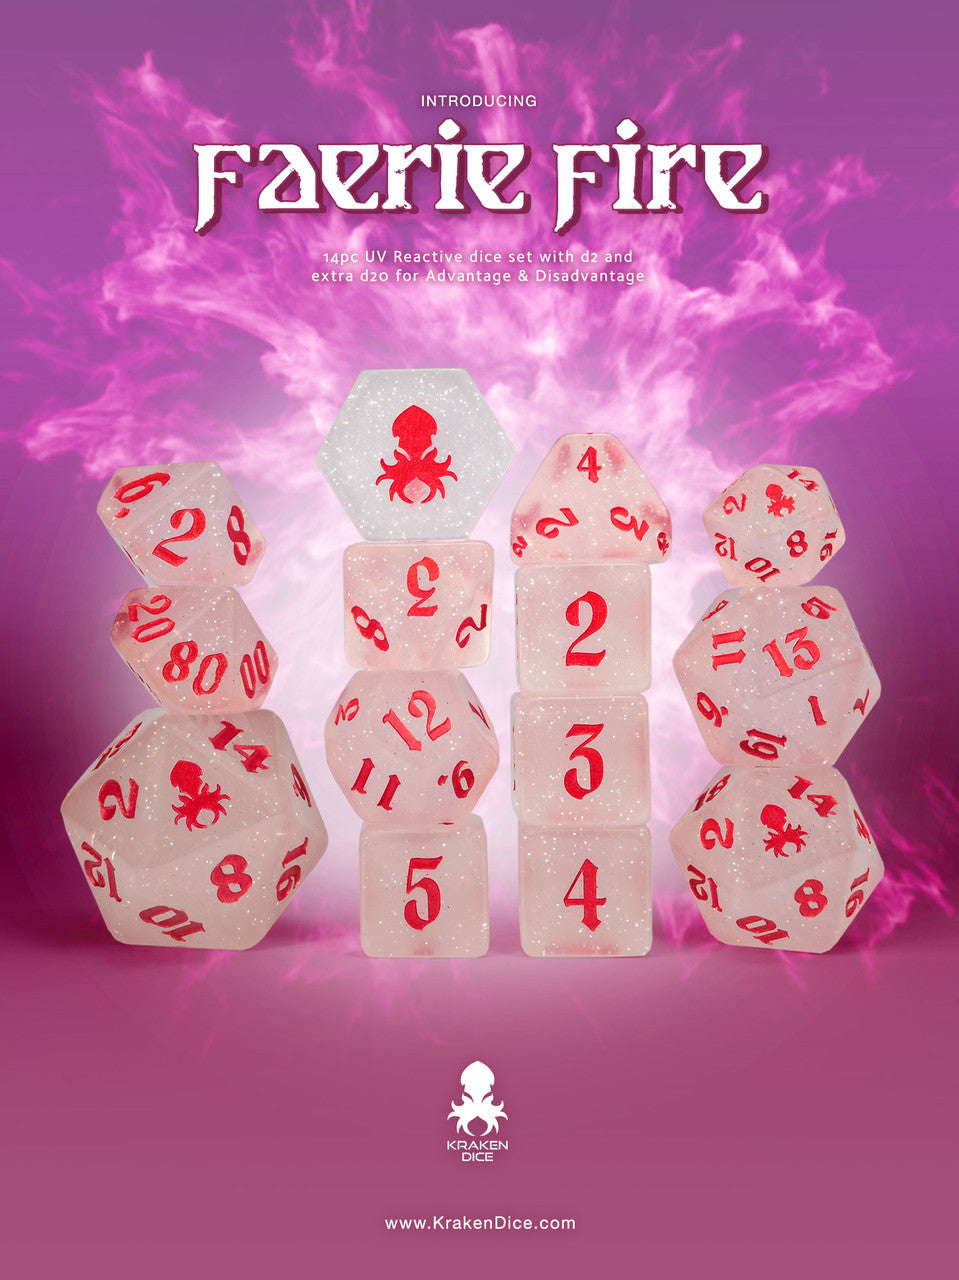 Faerie Fire 14pc UV Reactive Dice Set for inked in Red